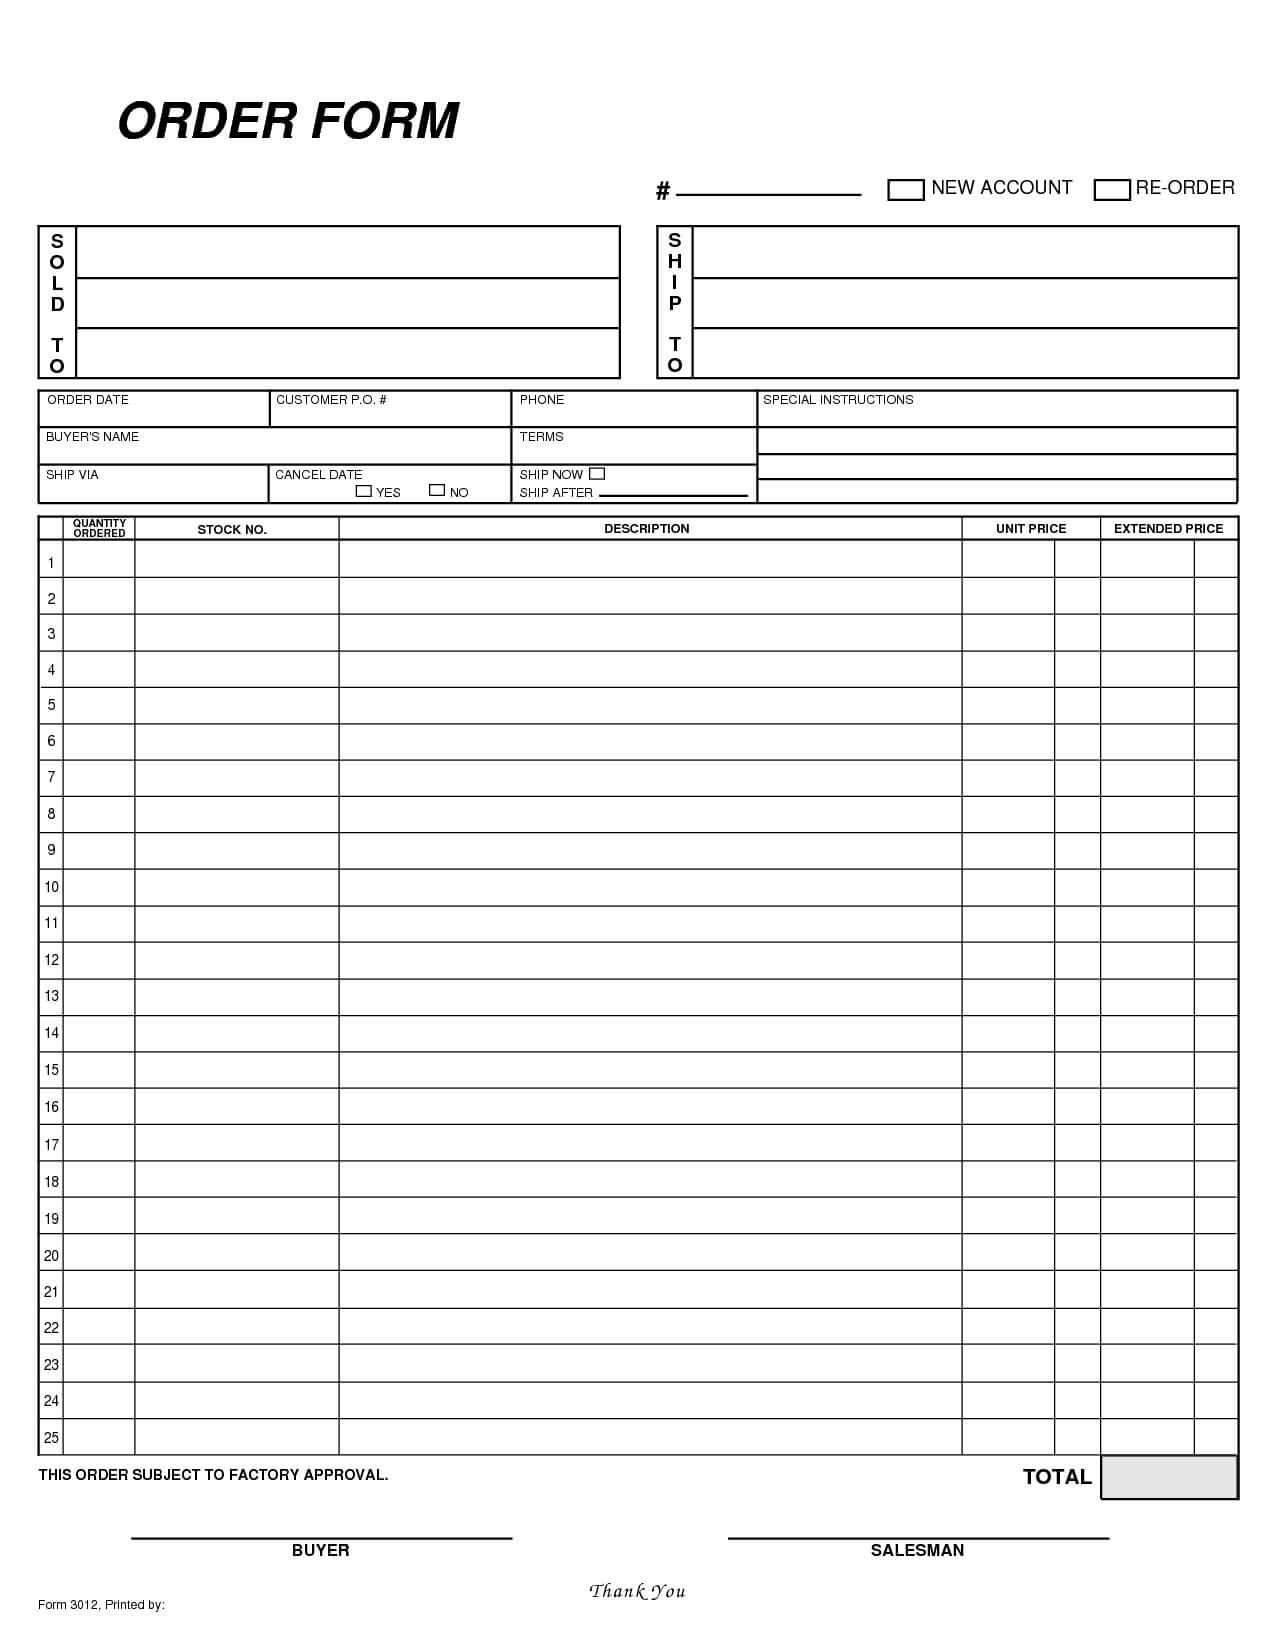 Blank Order Forms For T Shirts | Azərbaycan Dillər Universiteti Within Blank T Shirt Order Form Template